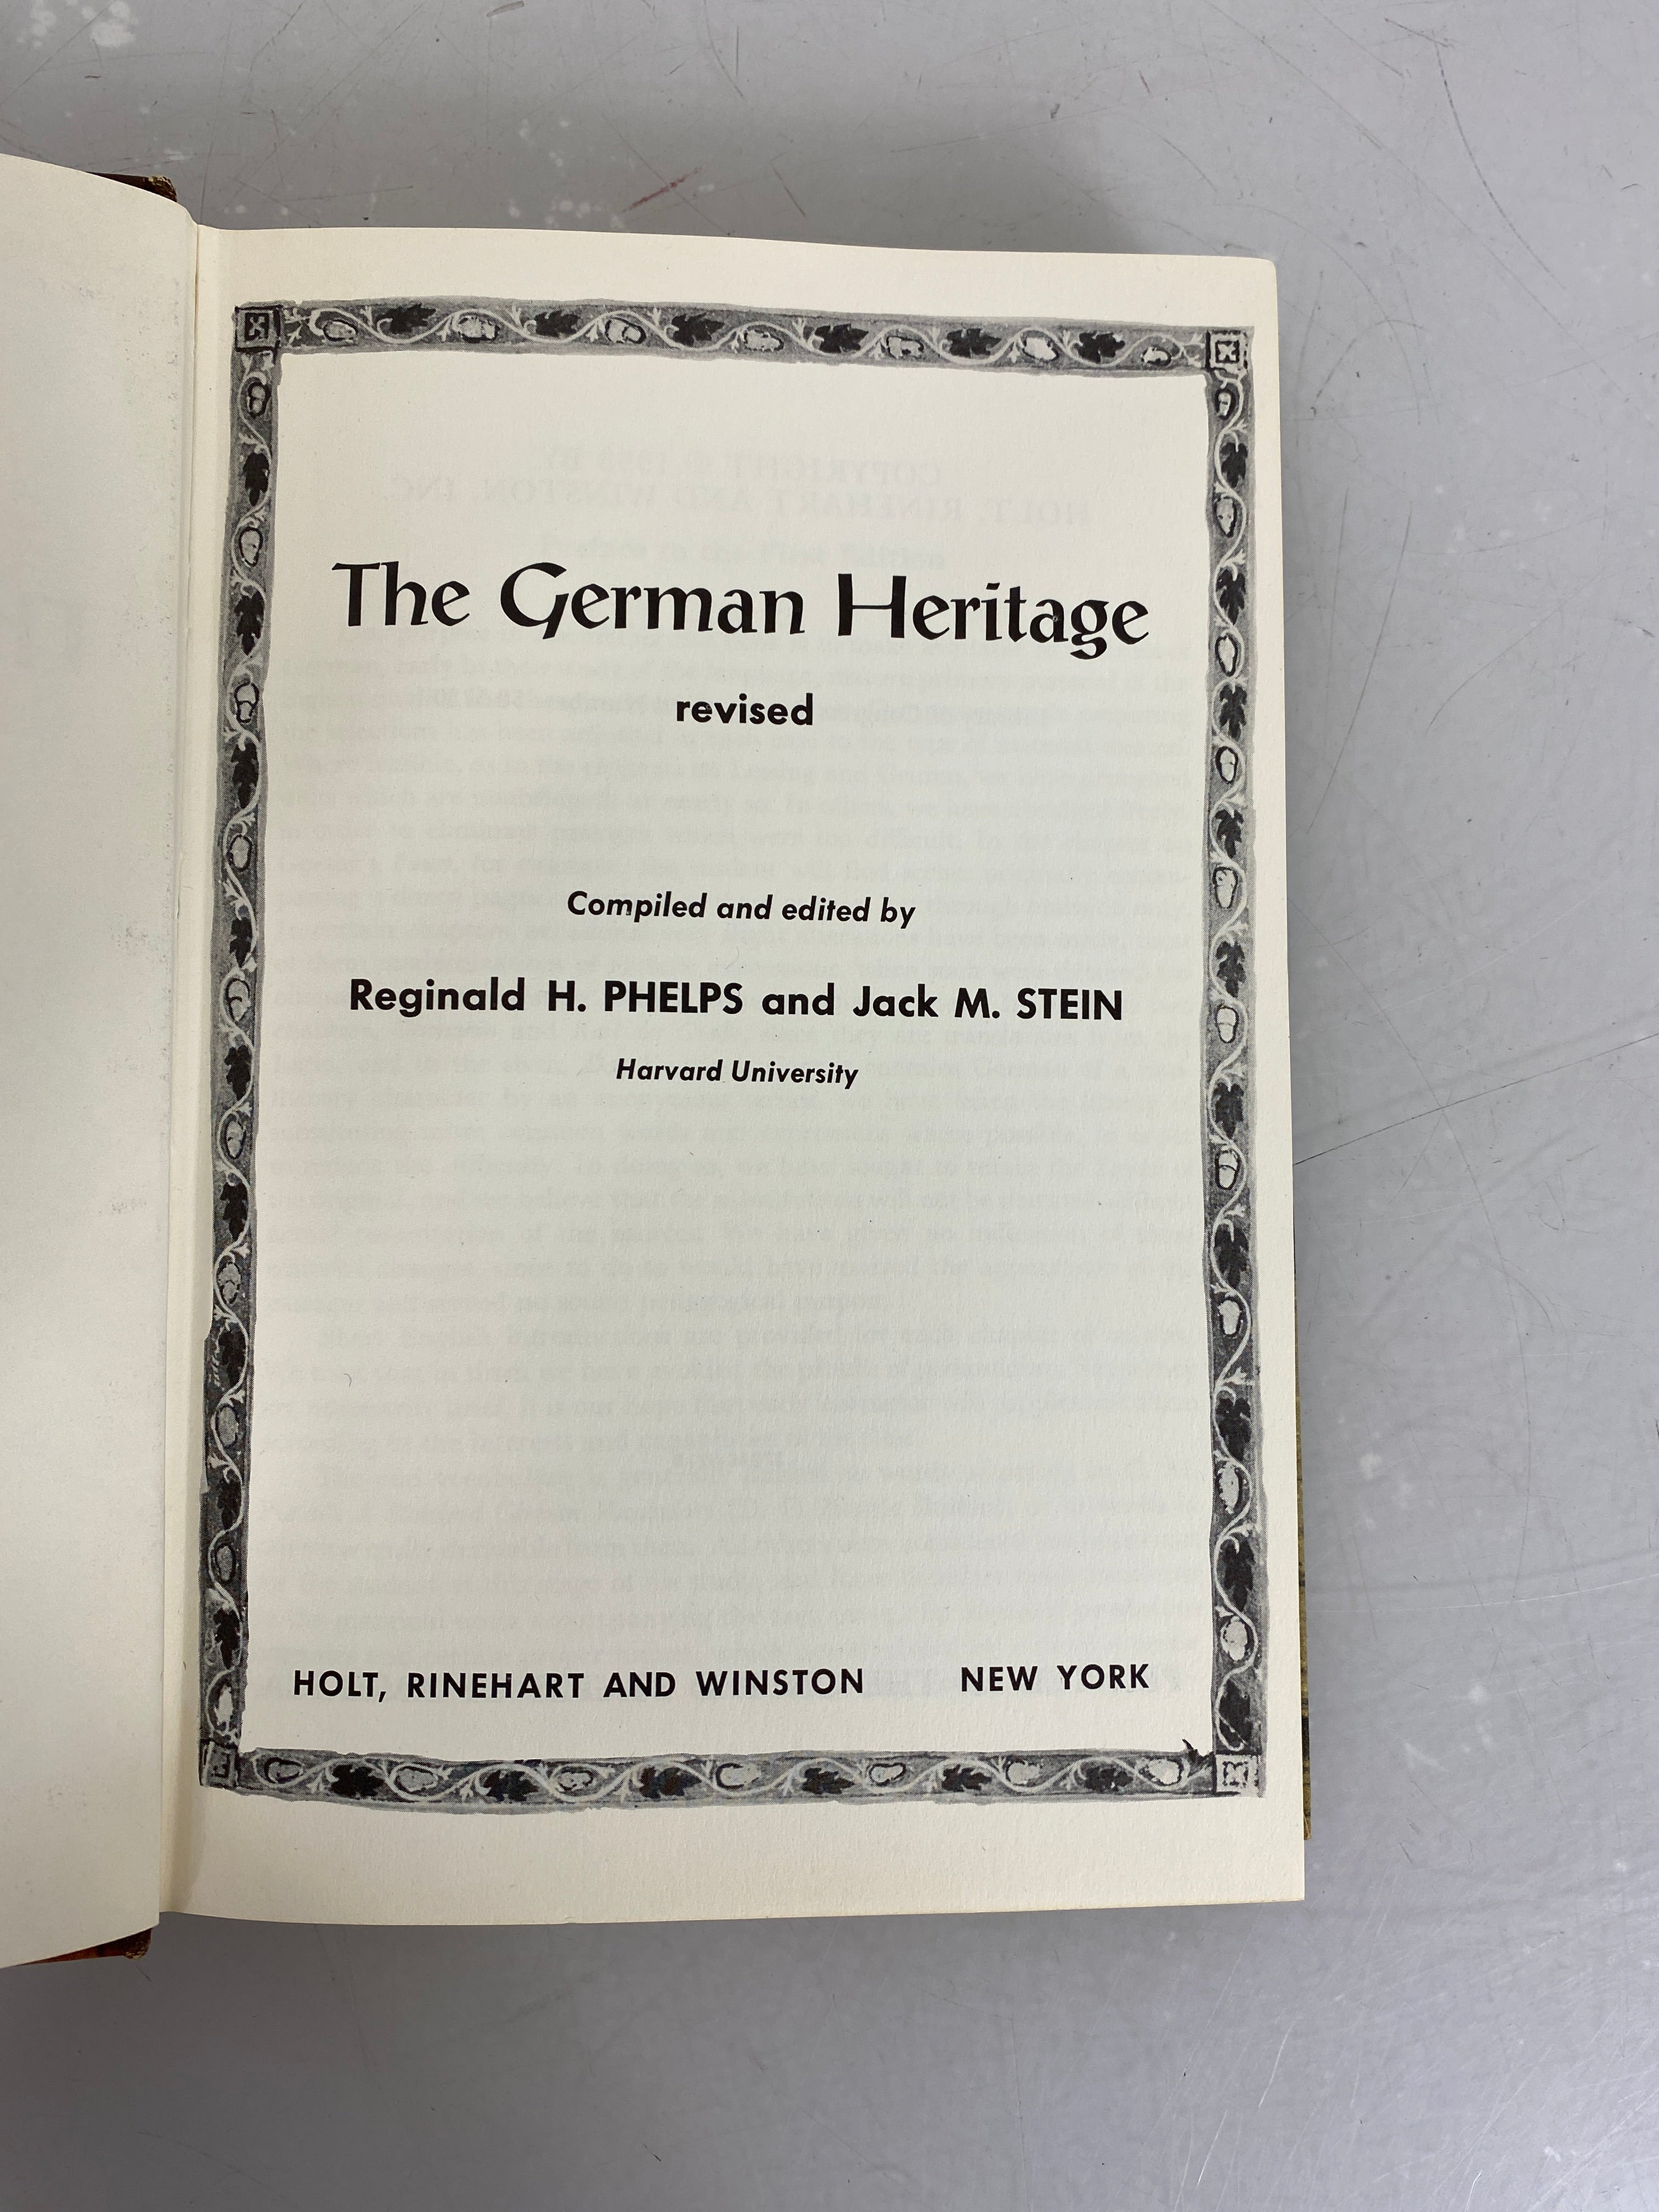 Lot of 2 German History and Heritage Books 1958, 1963 HC, SC